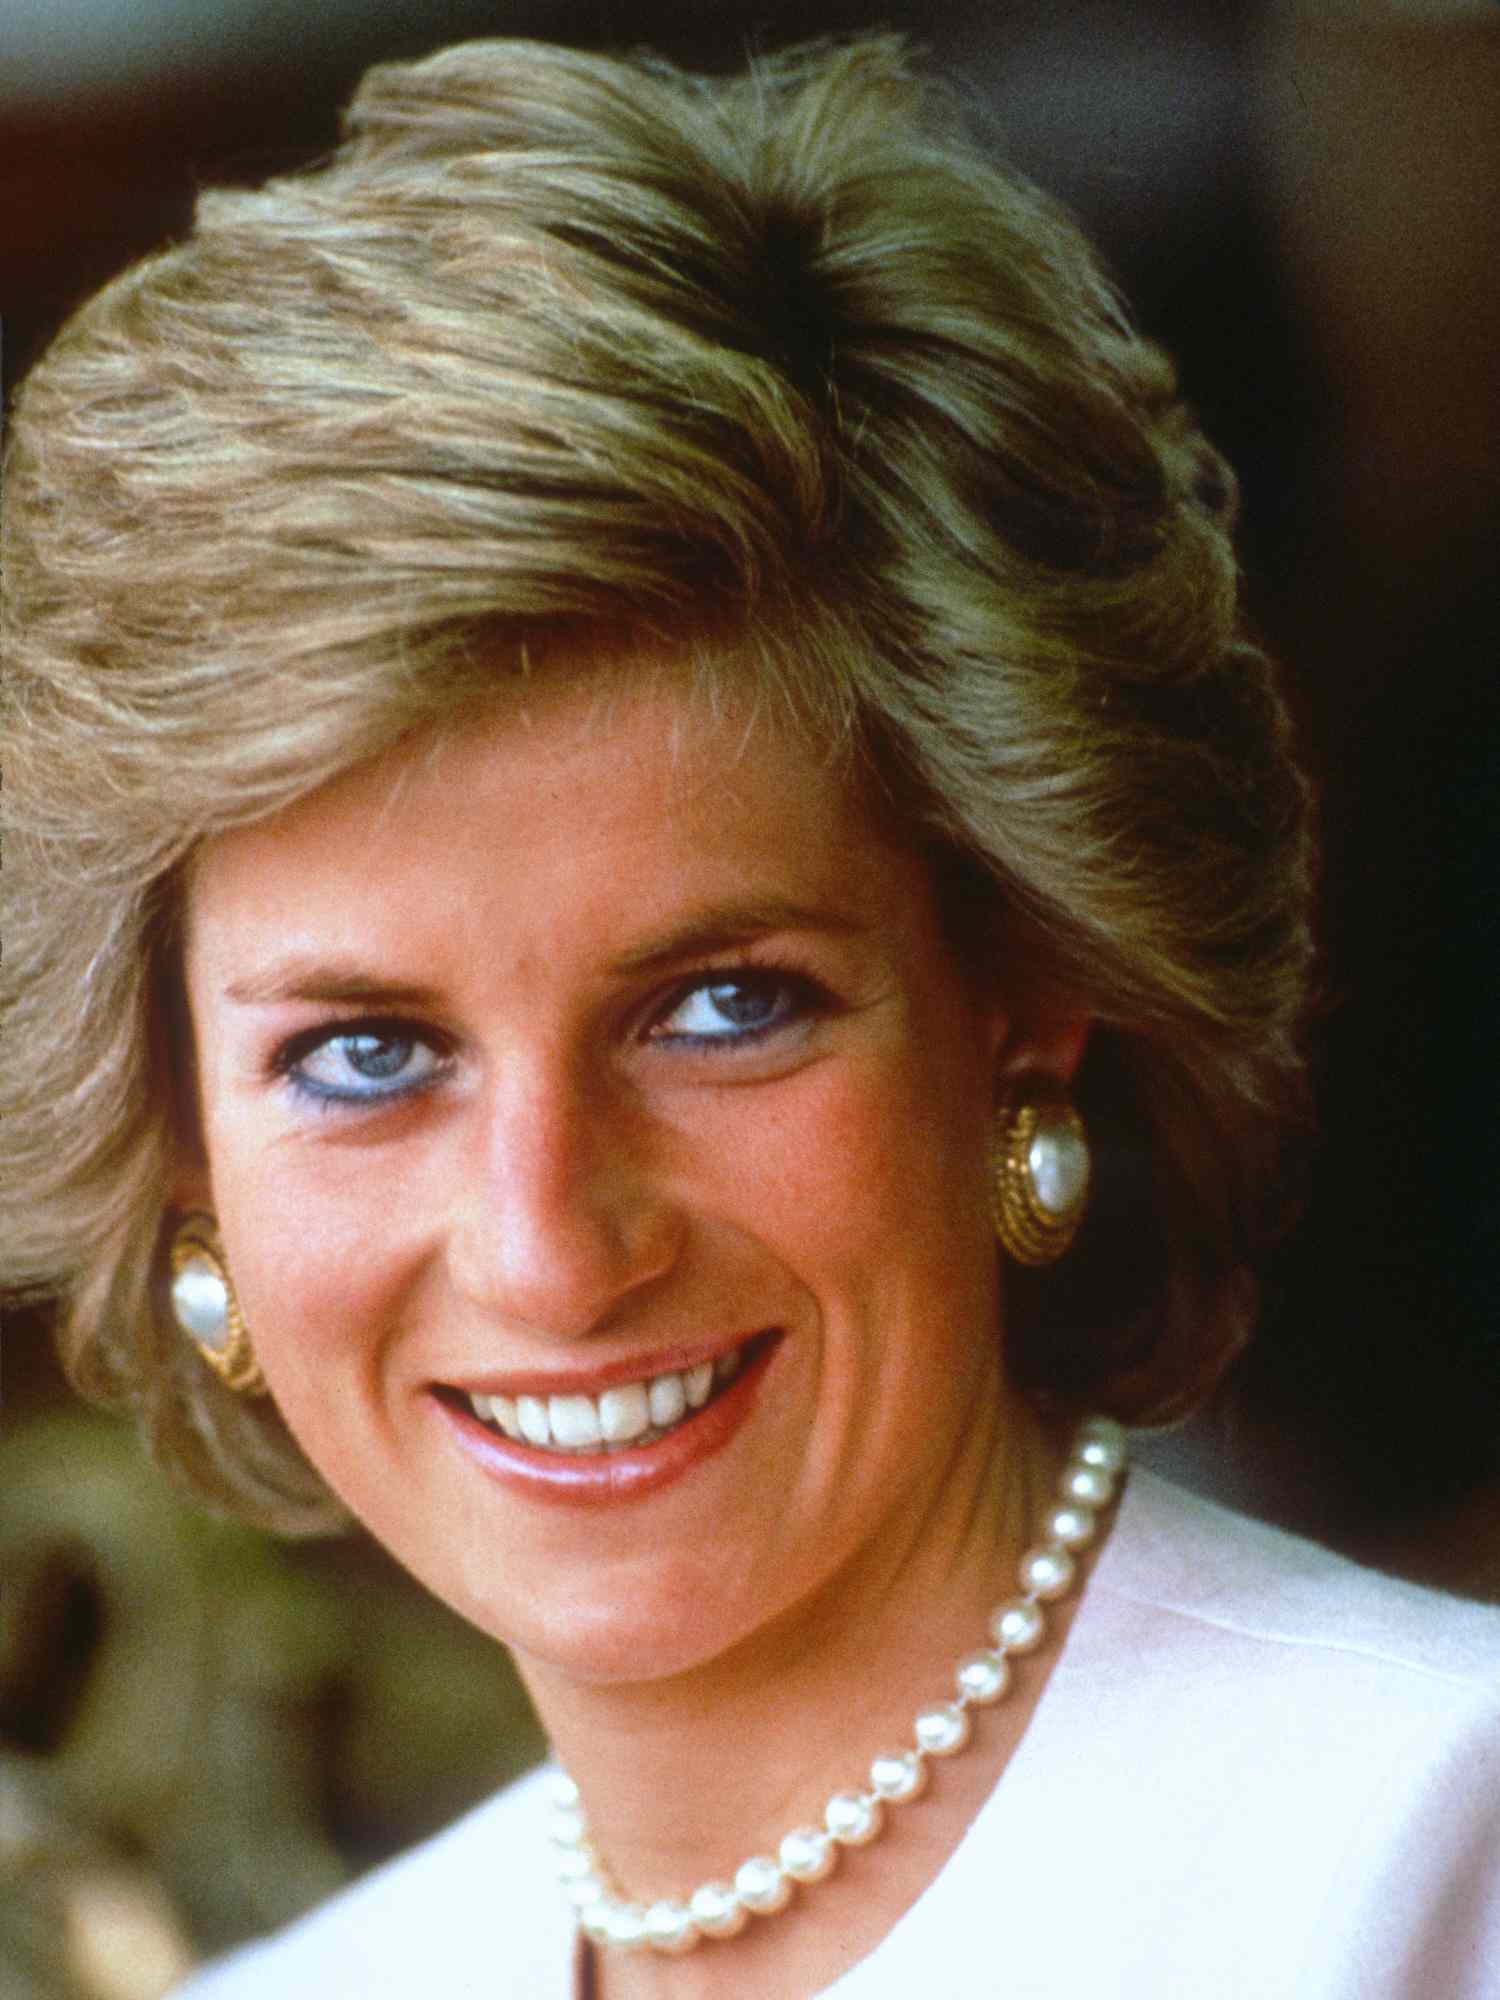 Princess Diana wearing a voluminous bouffant hairstyle, pearl jewelry, and a pale pink Catherine Walker suit